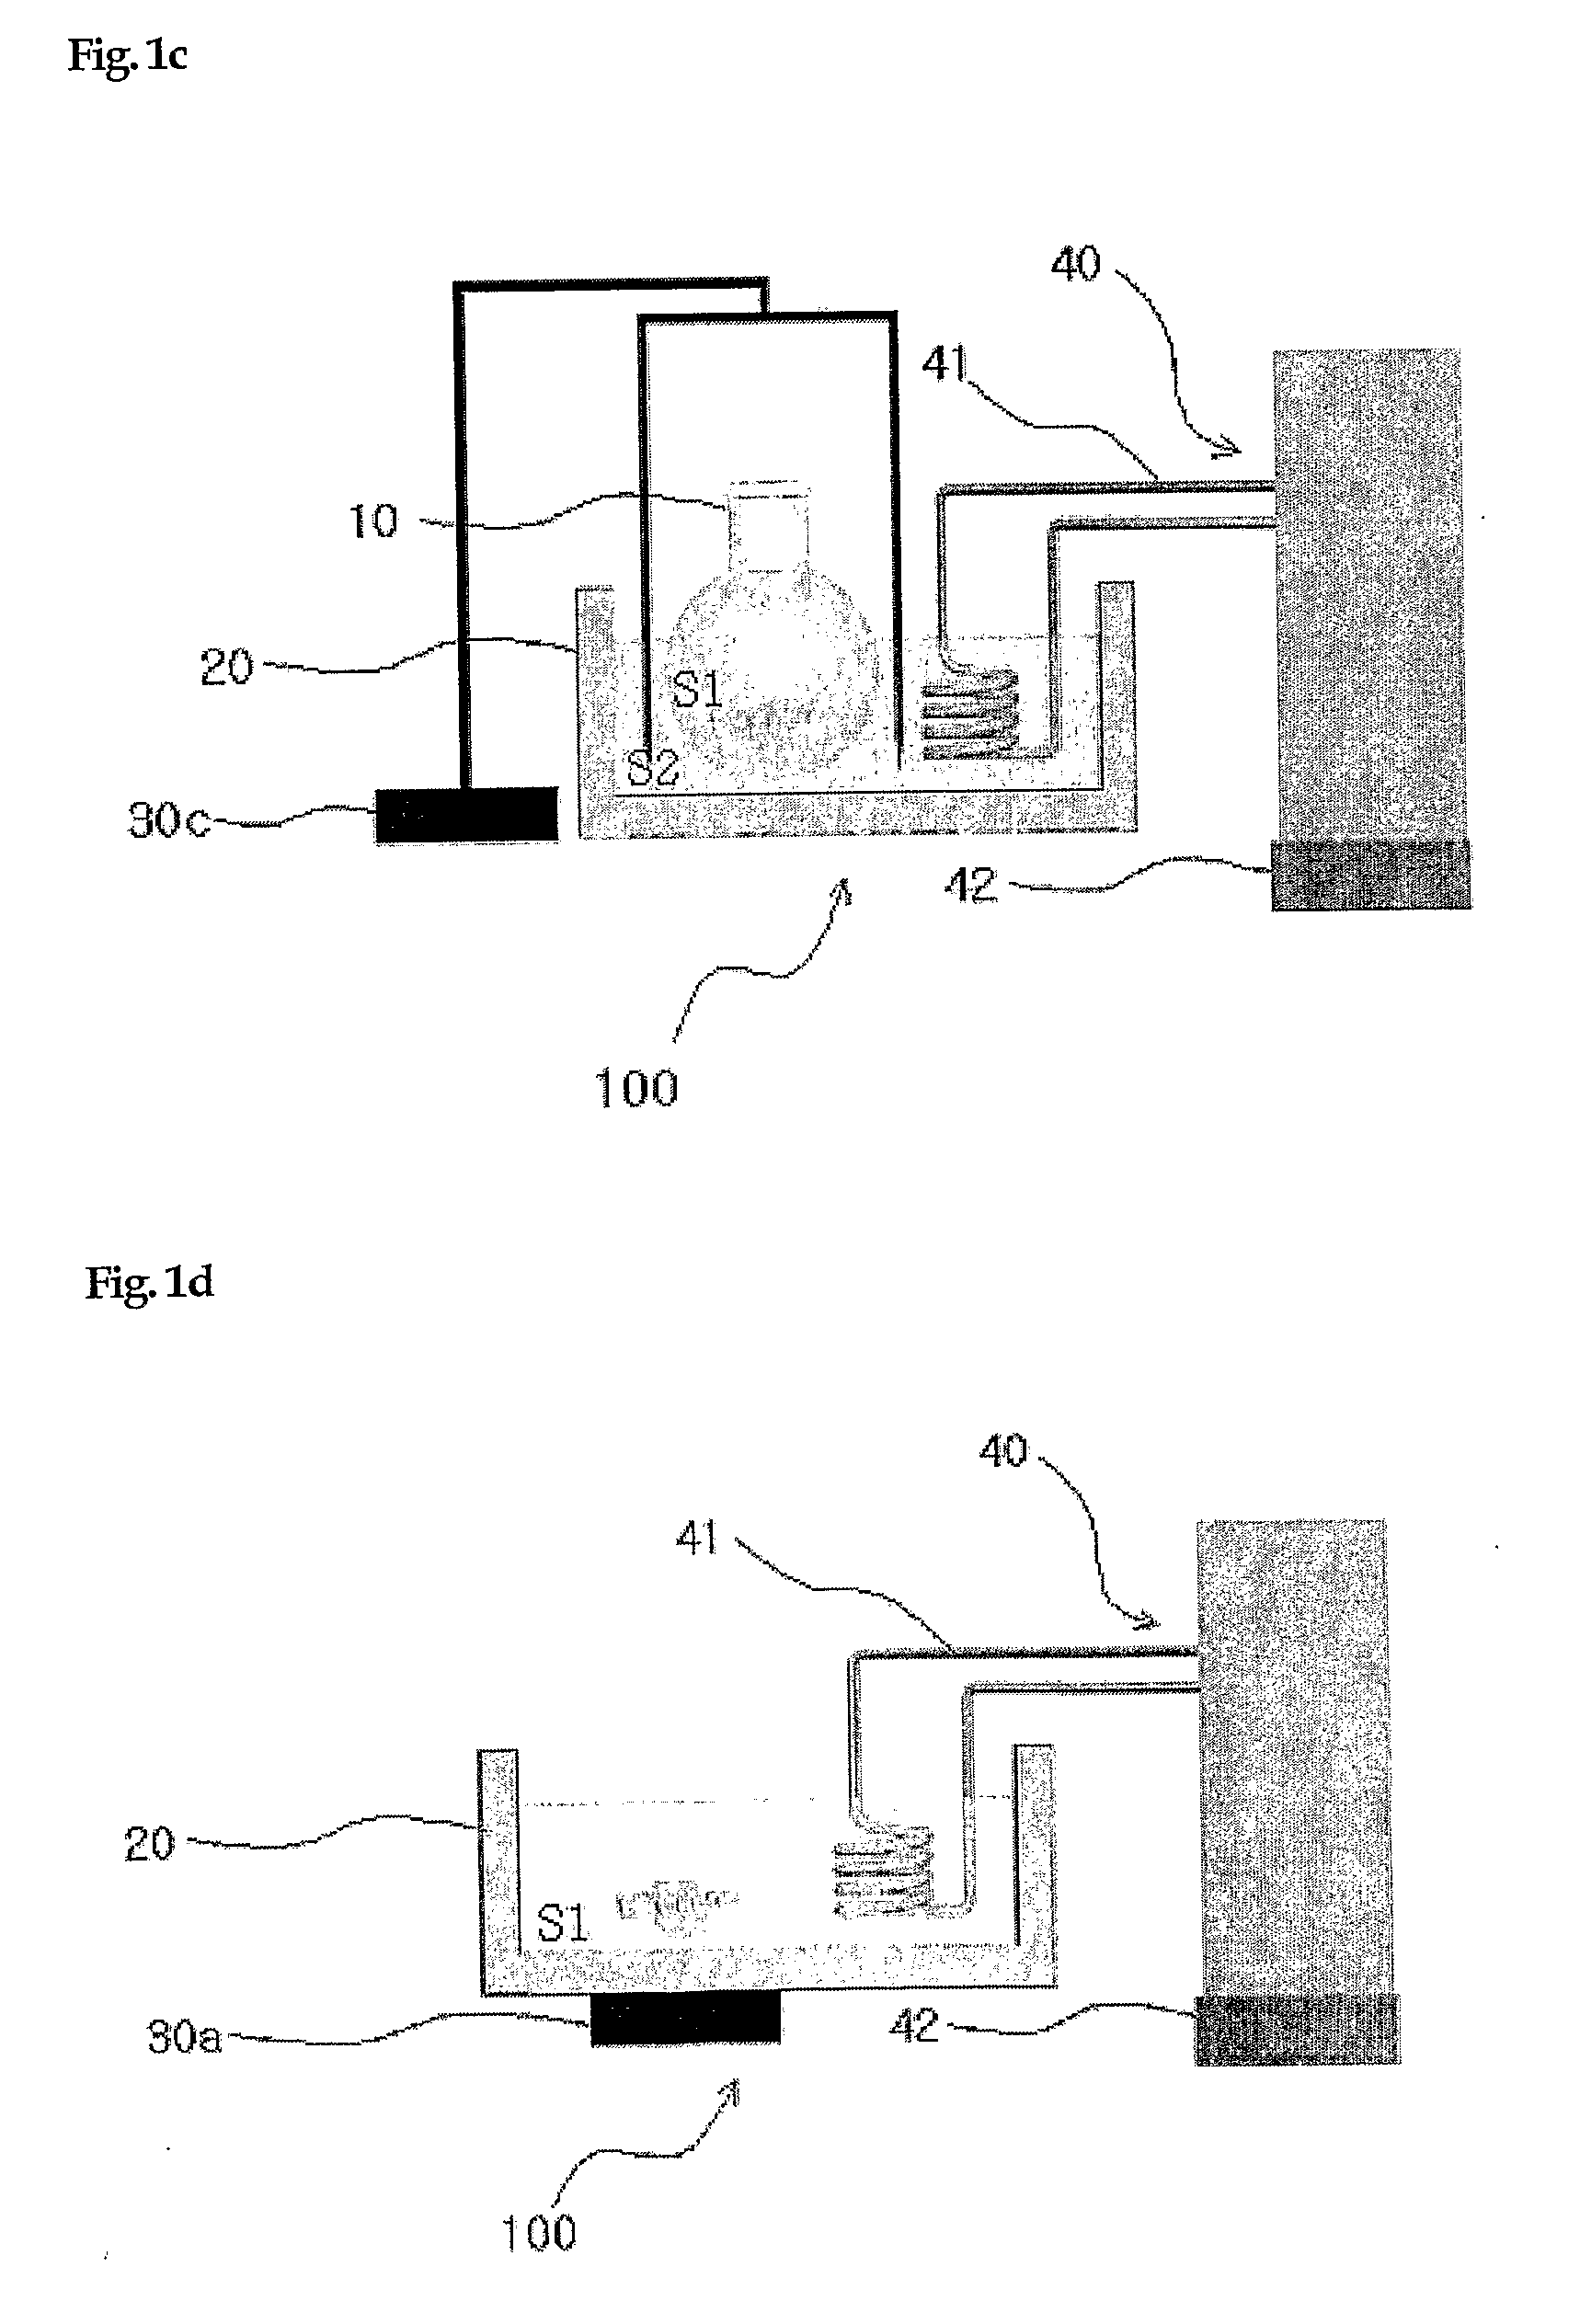 Method of Preparing Substrates - Molecular Sieve Layers Complex Using Ultrasound and Apparatuses Used Therein